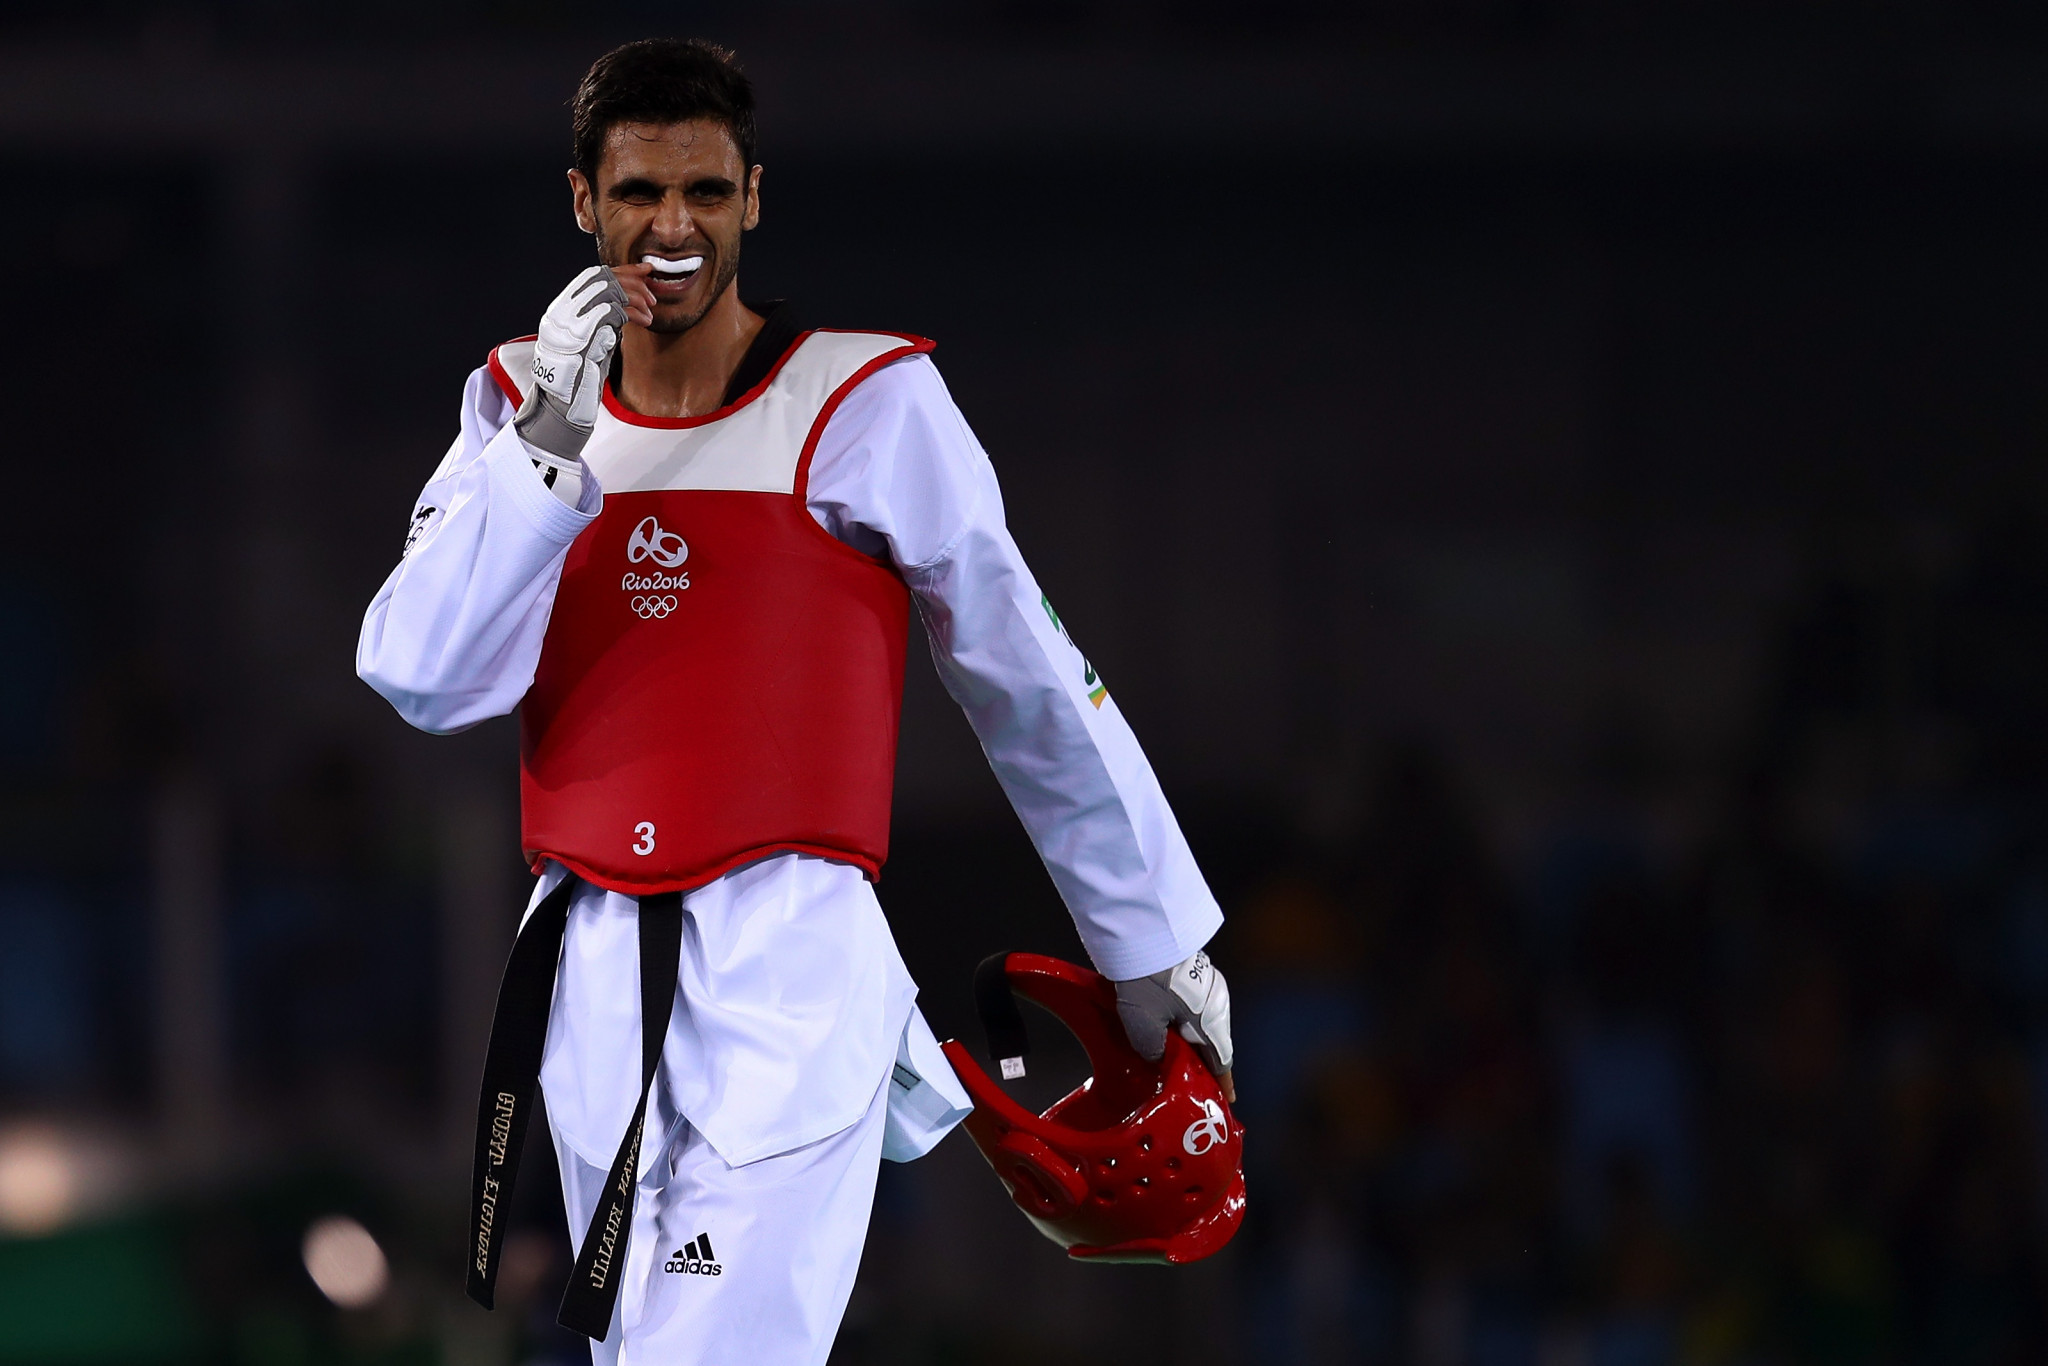 Safwan Khalil reached the quarter finals in his class at the Rio 2016 Olympic Games ©Getty Images